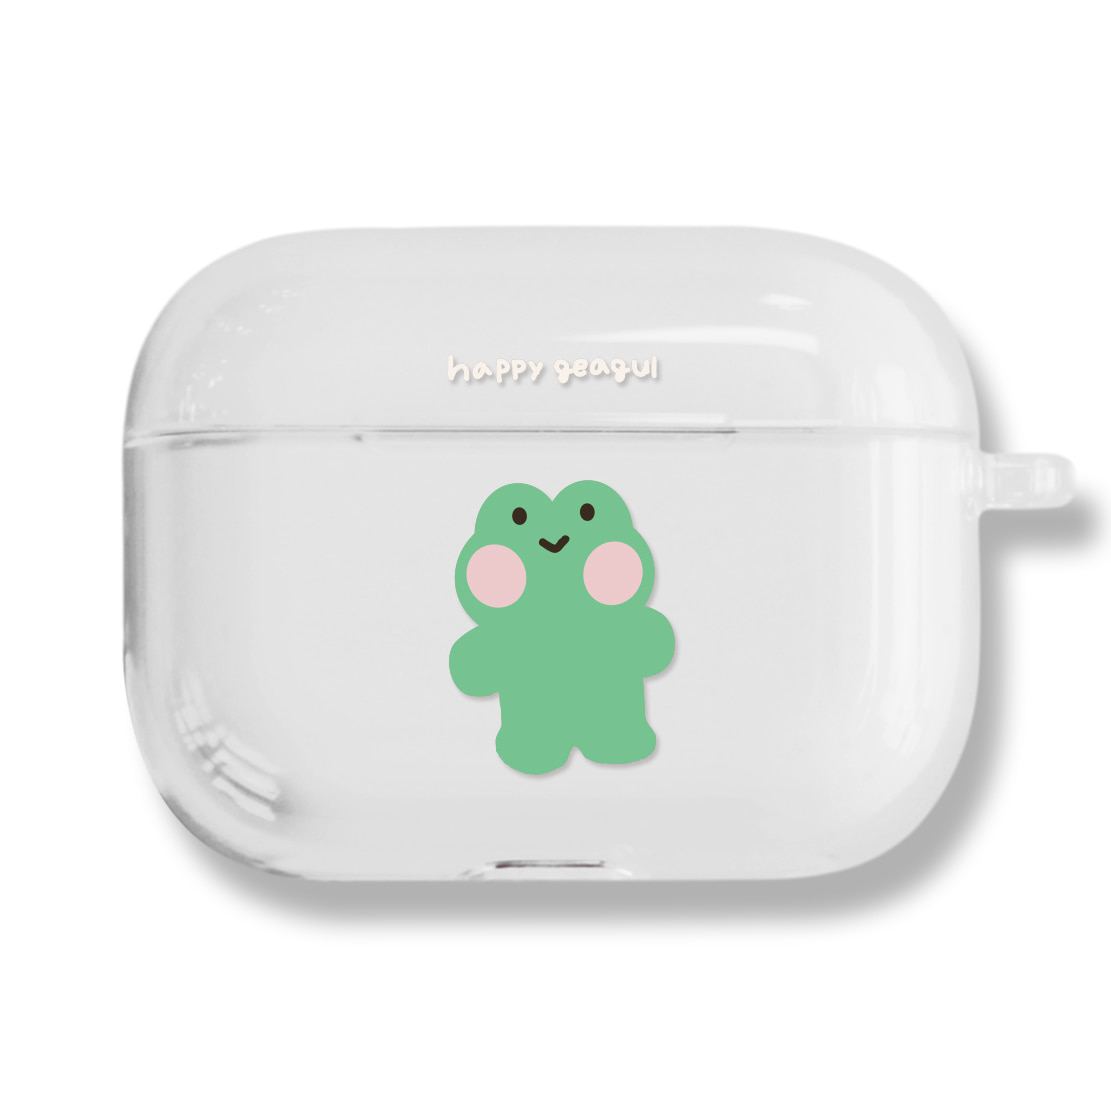 [CLEAR AIRPODS PRO] 730 해피개굴